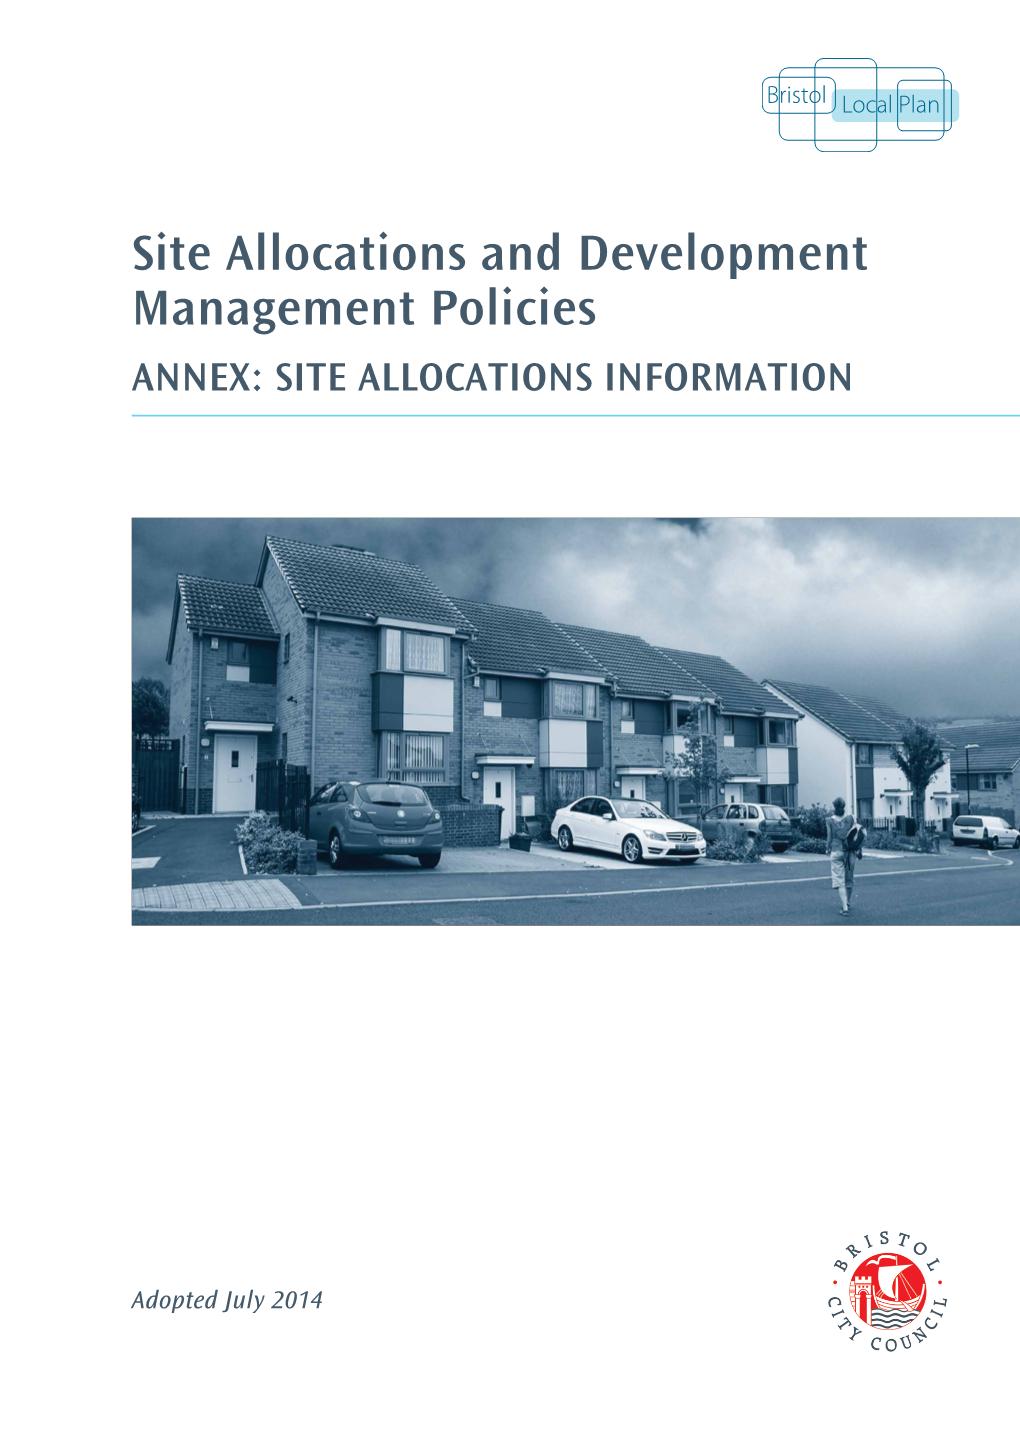 Site Allocations and Development Management Policies ANNEX: SITE ALLOCATIONS INFORMATION